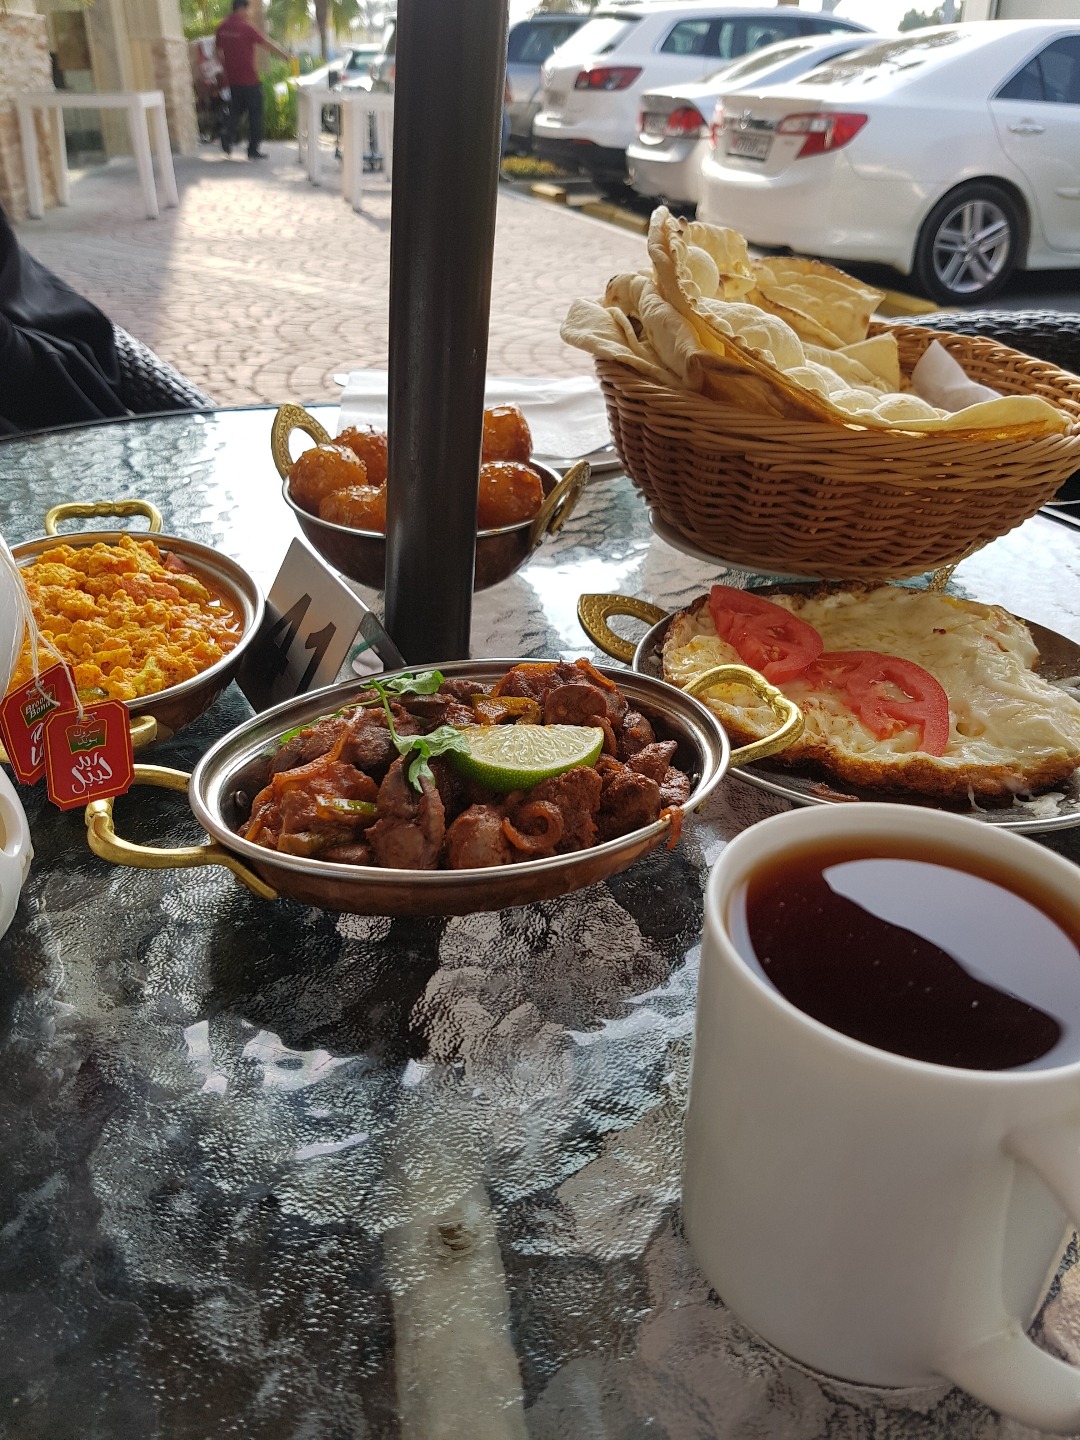 Nice breakfast. 
the chicken liver was extra delicious.
the shakshoka and sunny side egg with cheese and loghaymat also was great.
the service sooo bad
the waiters so rude @ Al Ameer Restaurant - Bahrain